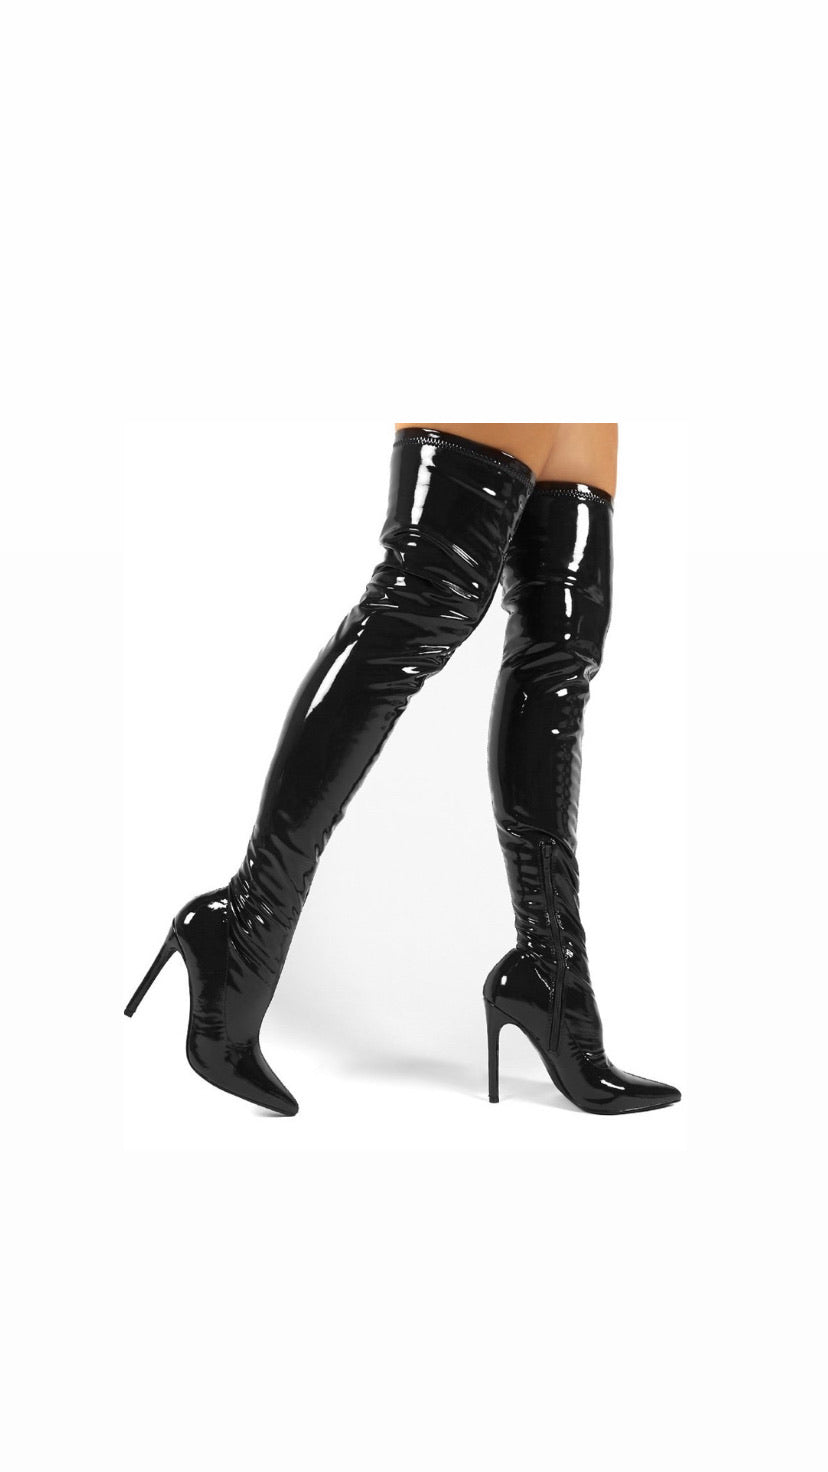 Fly ish thigh high boot